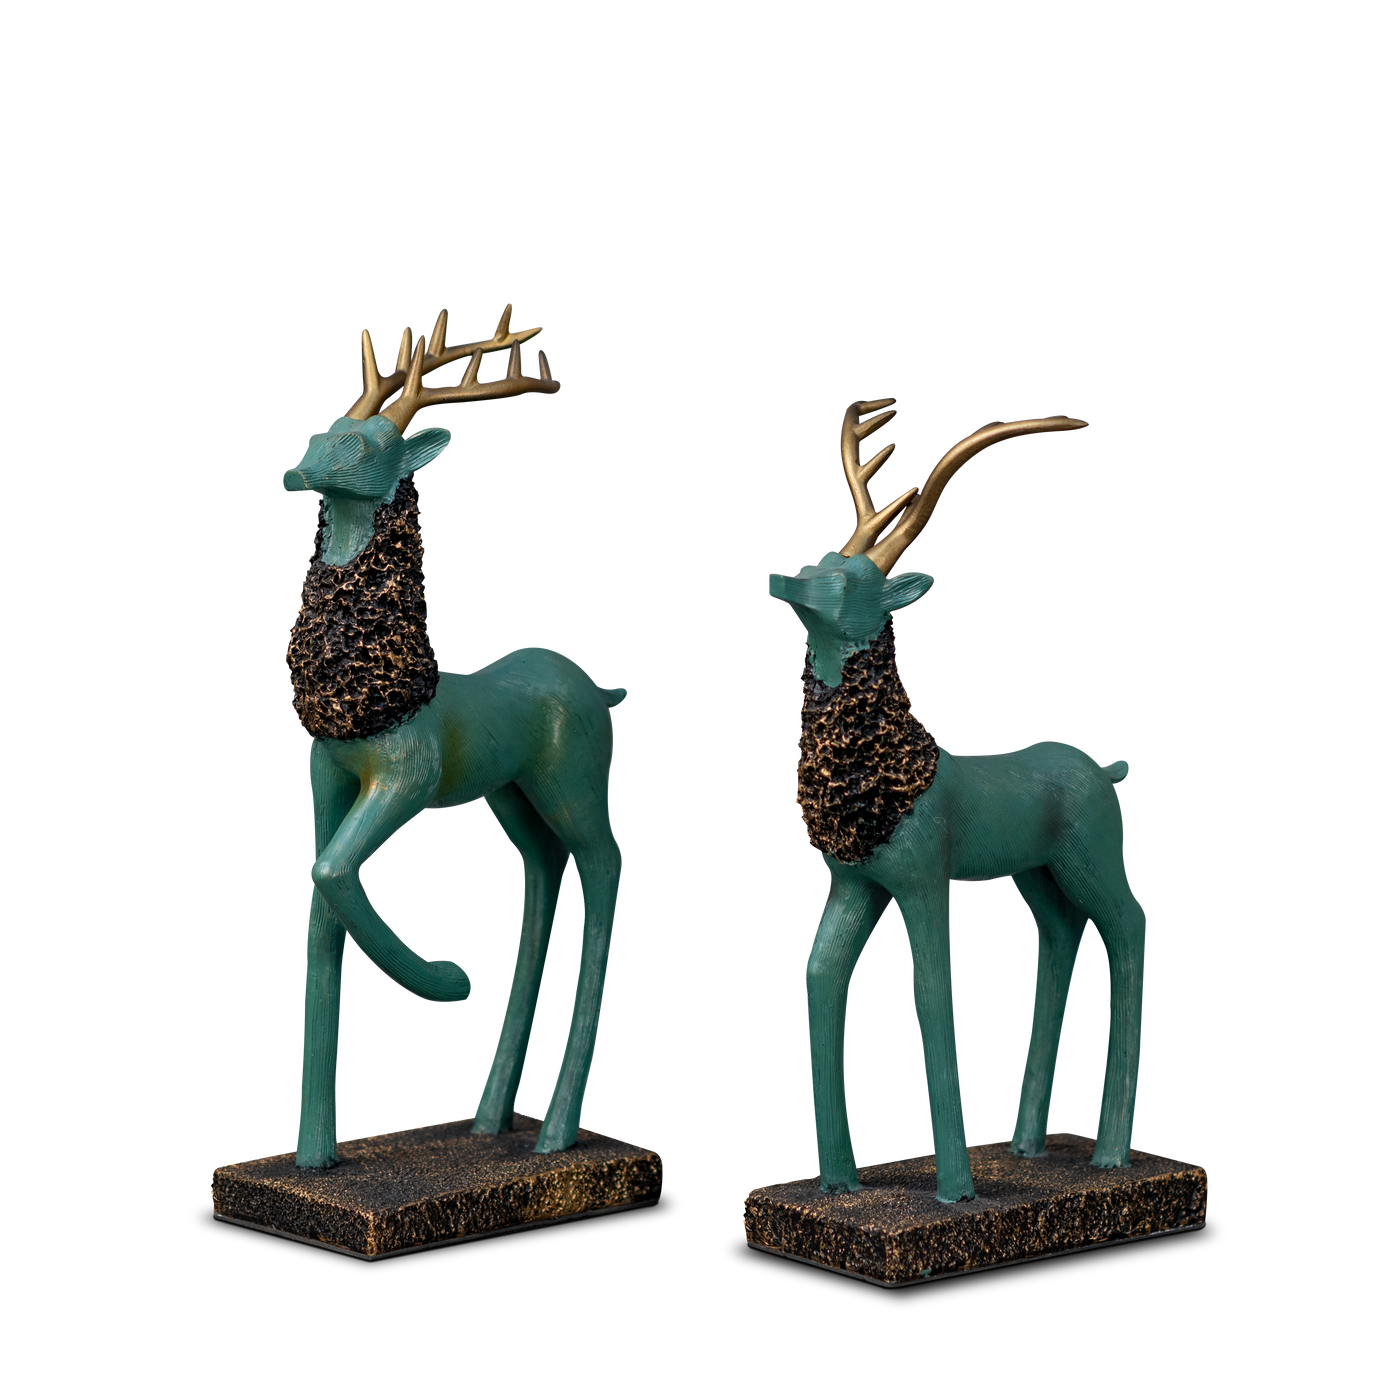 Decorative statues by Home 360